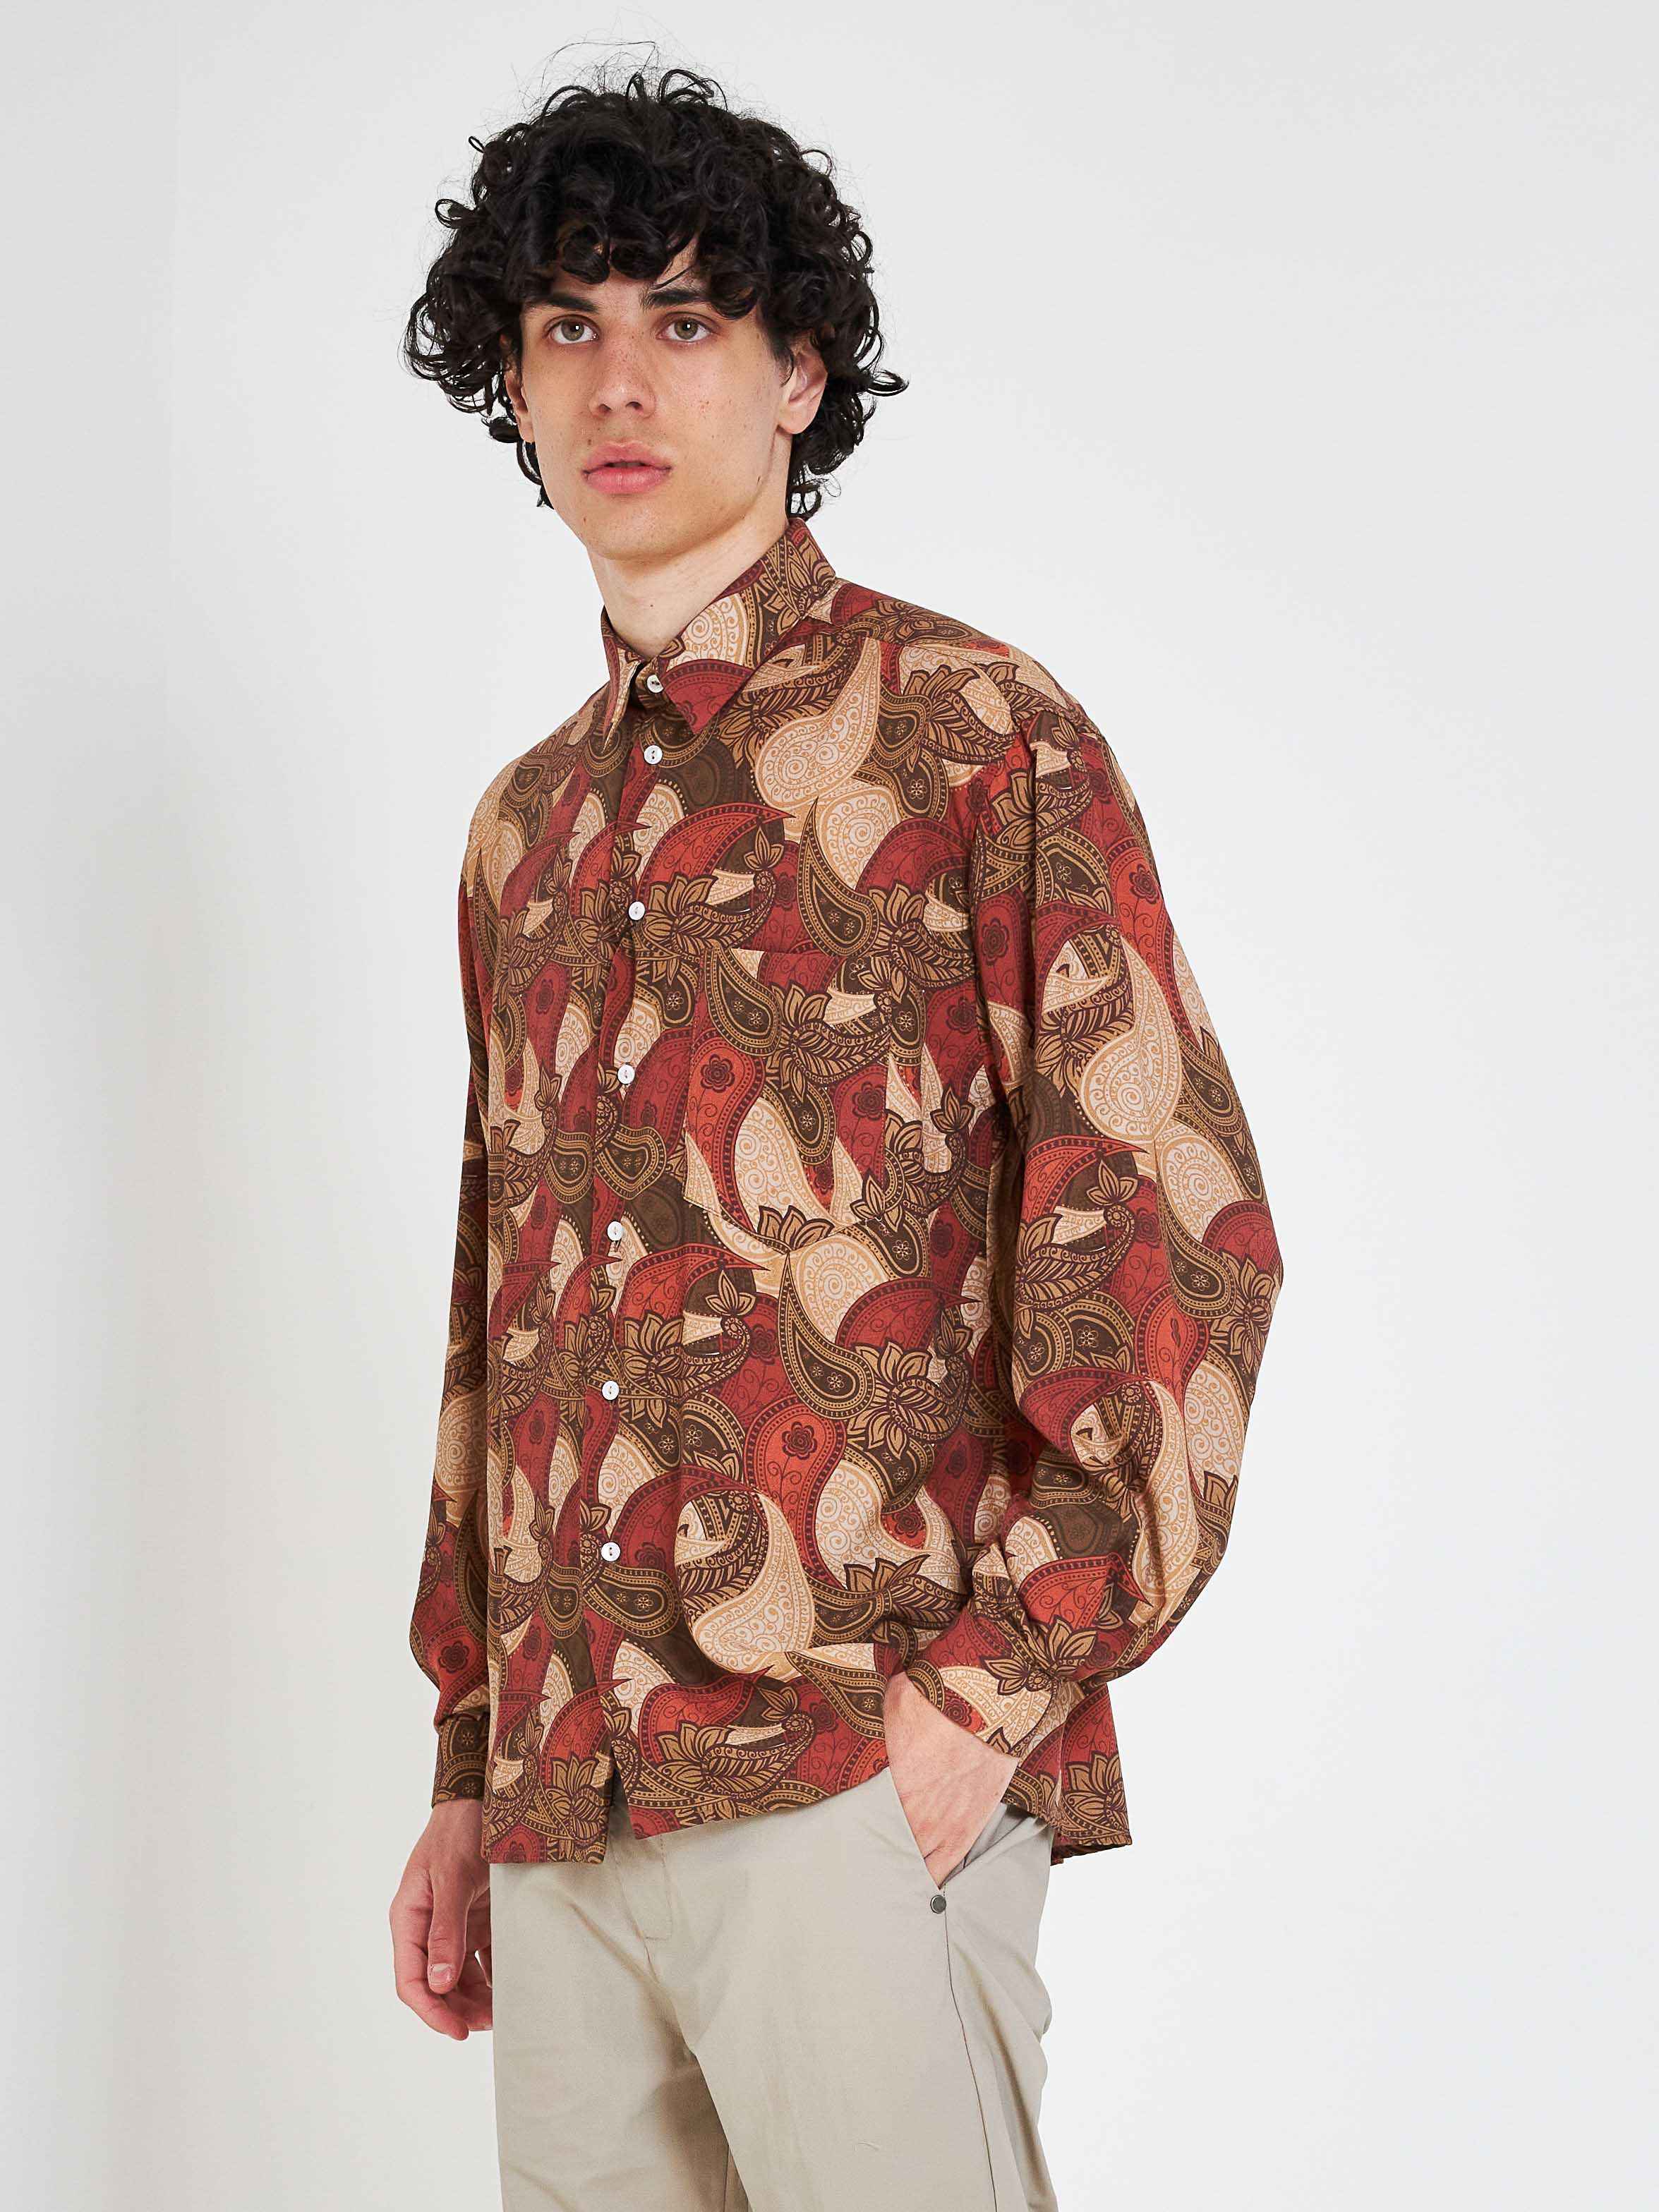 Mood One patterned shirt